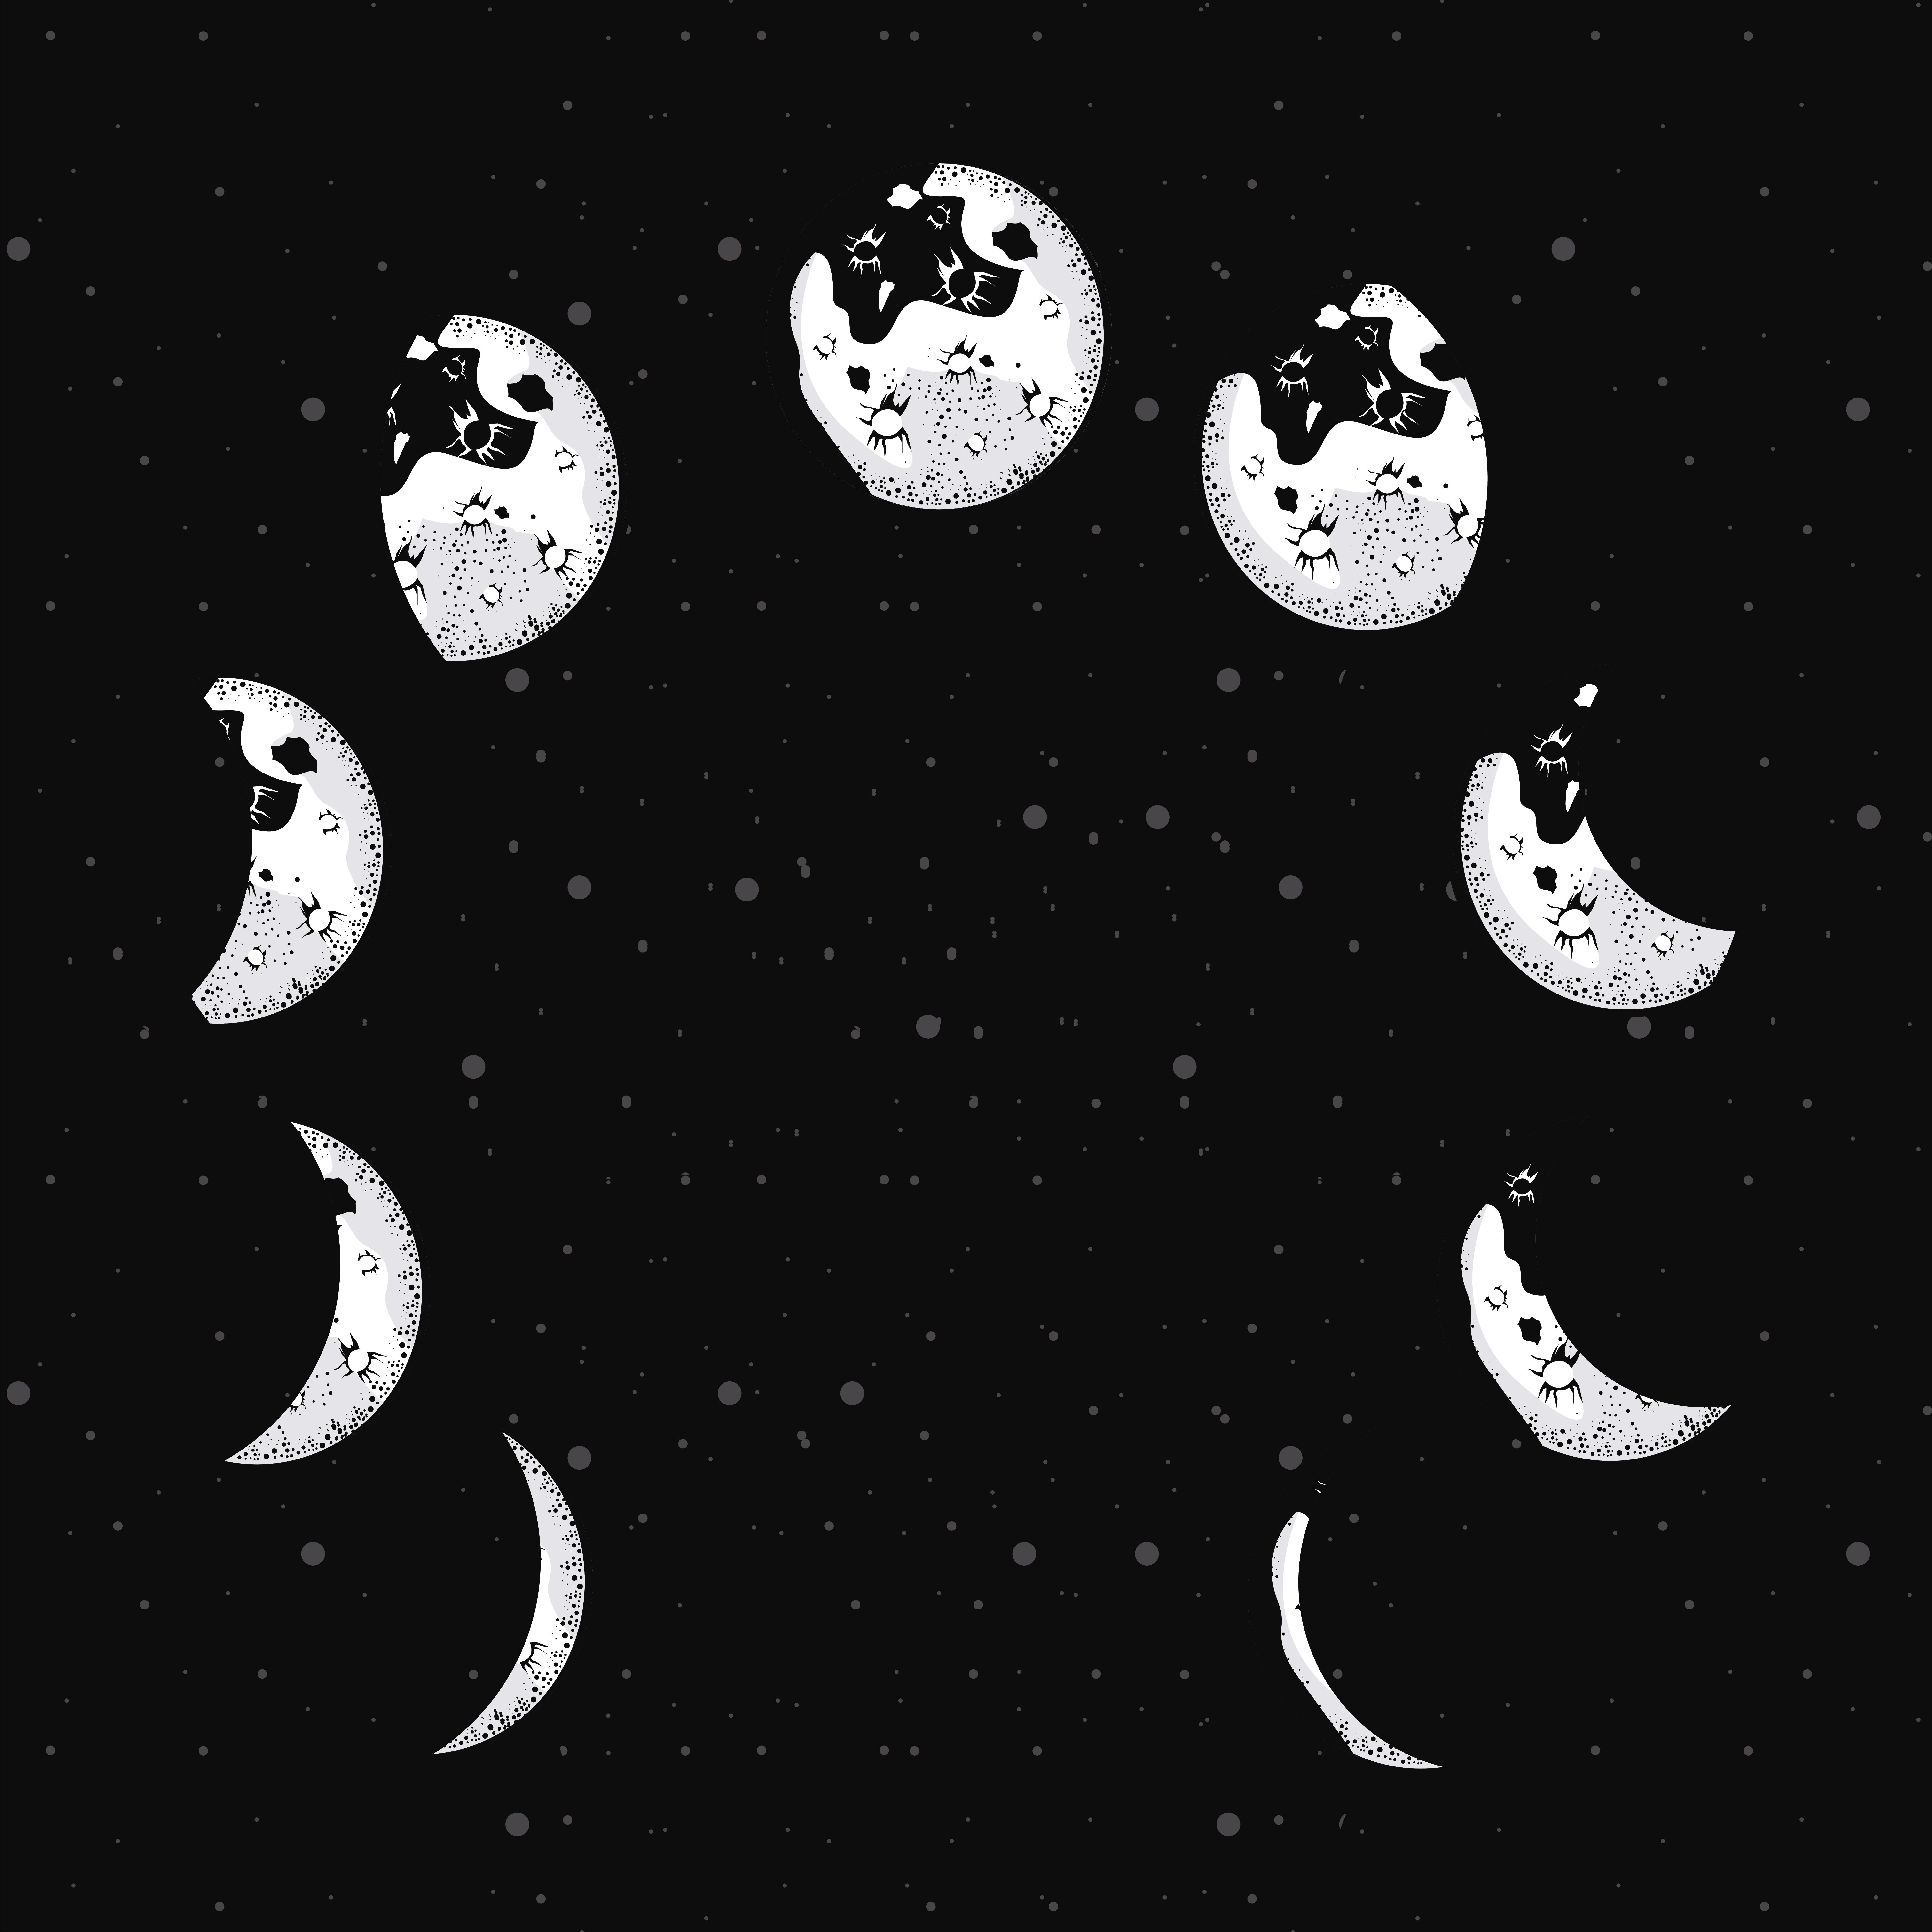 A circle of moon phases on black background - Moon phases